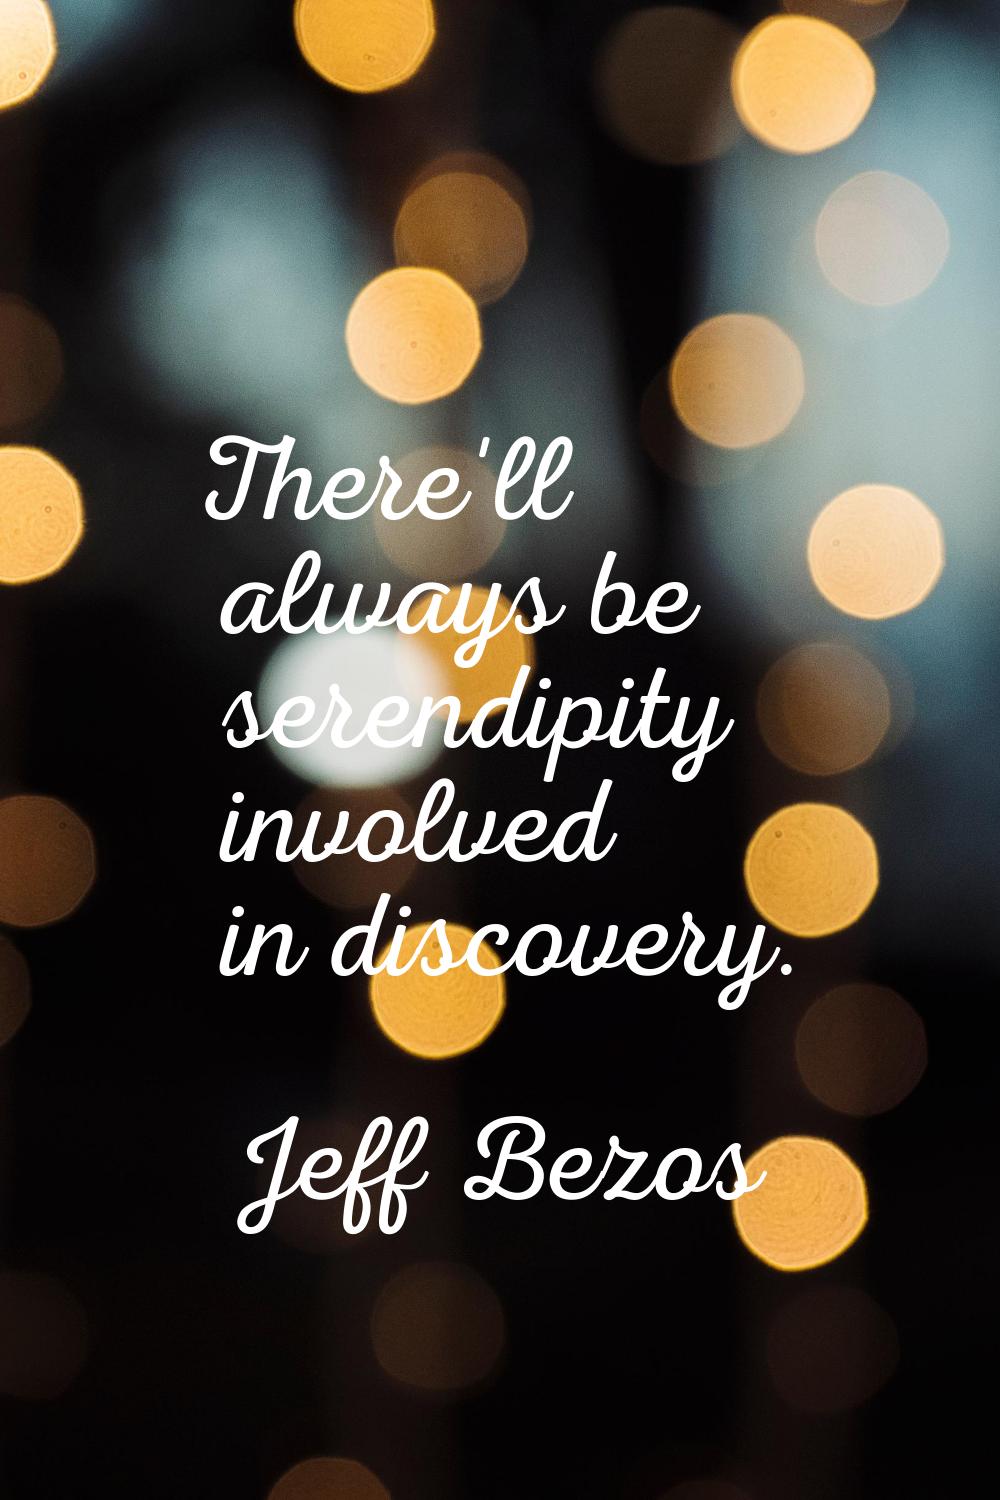 There'll always be serendipity involved in discovery.